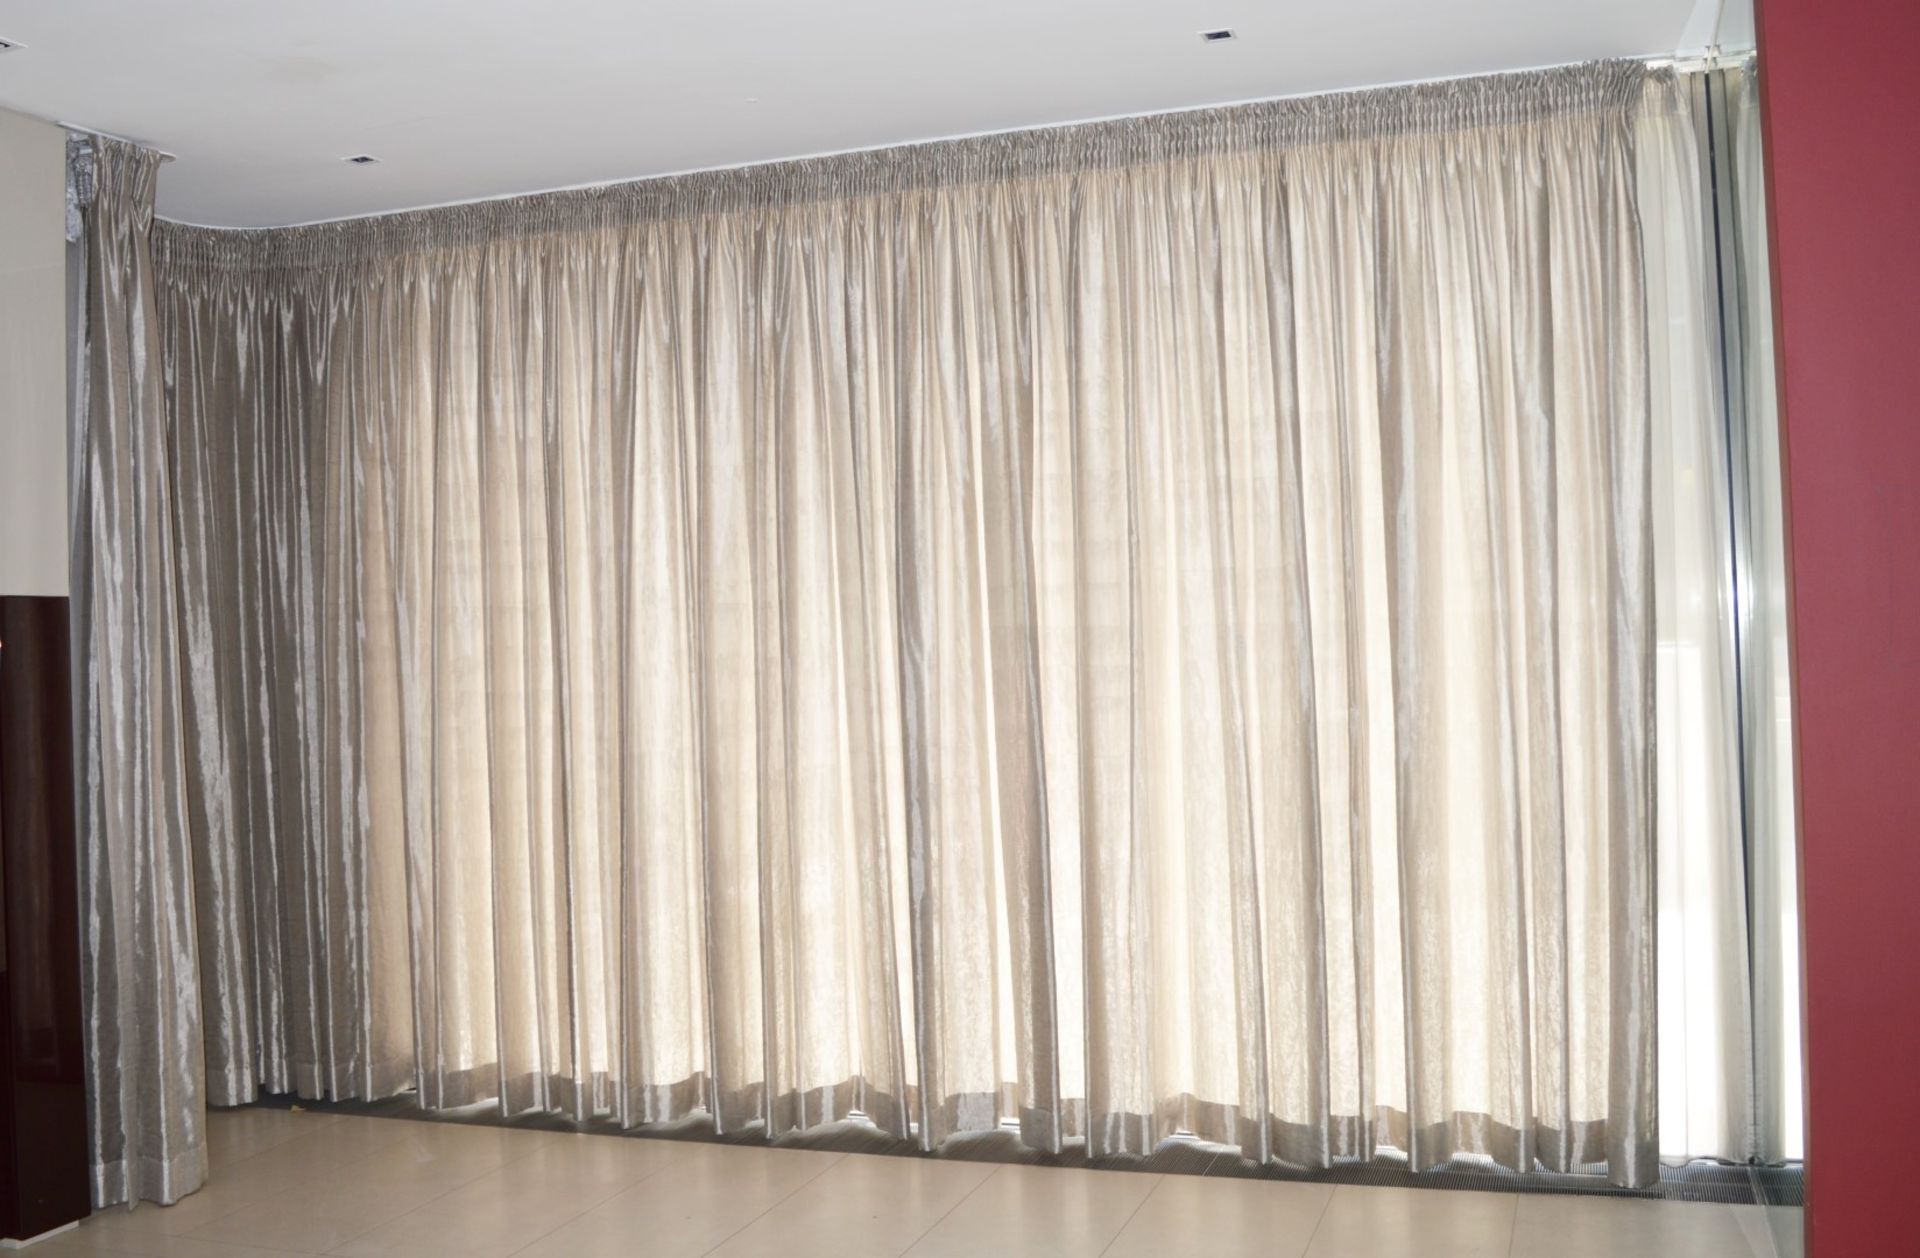 1 x Set of Curtains With Electric Motor - Ref 73 - Approx Length 800cm x Drop 307 cms - CL230 -